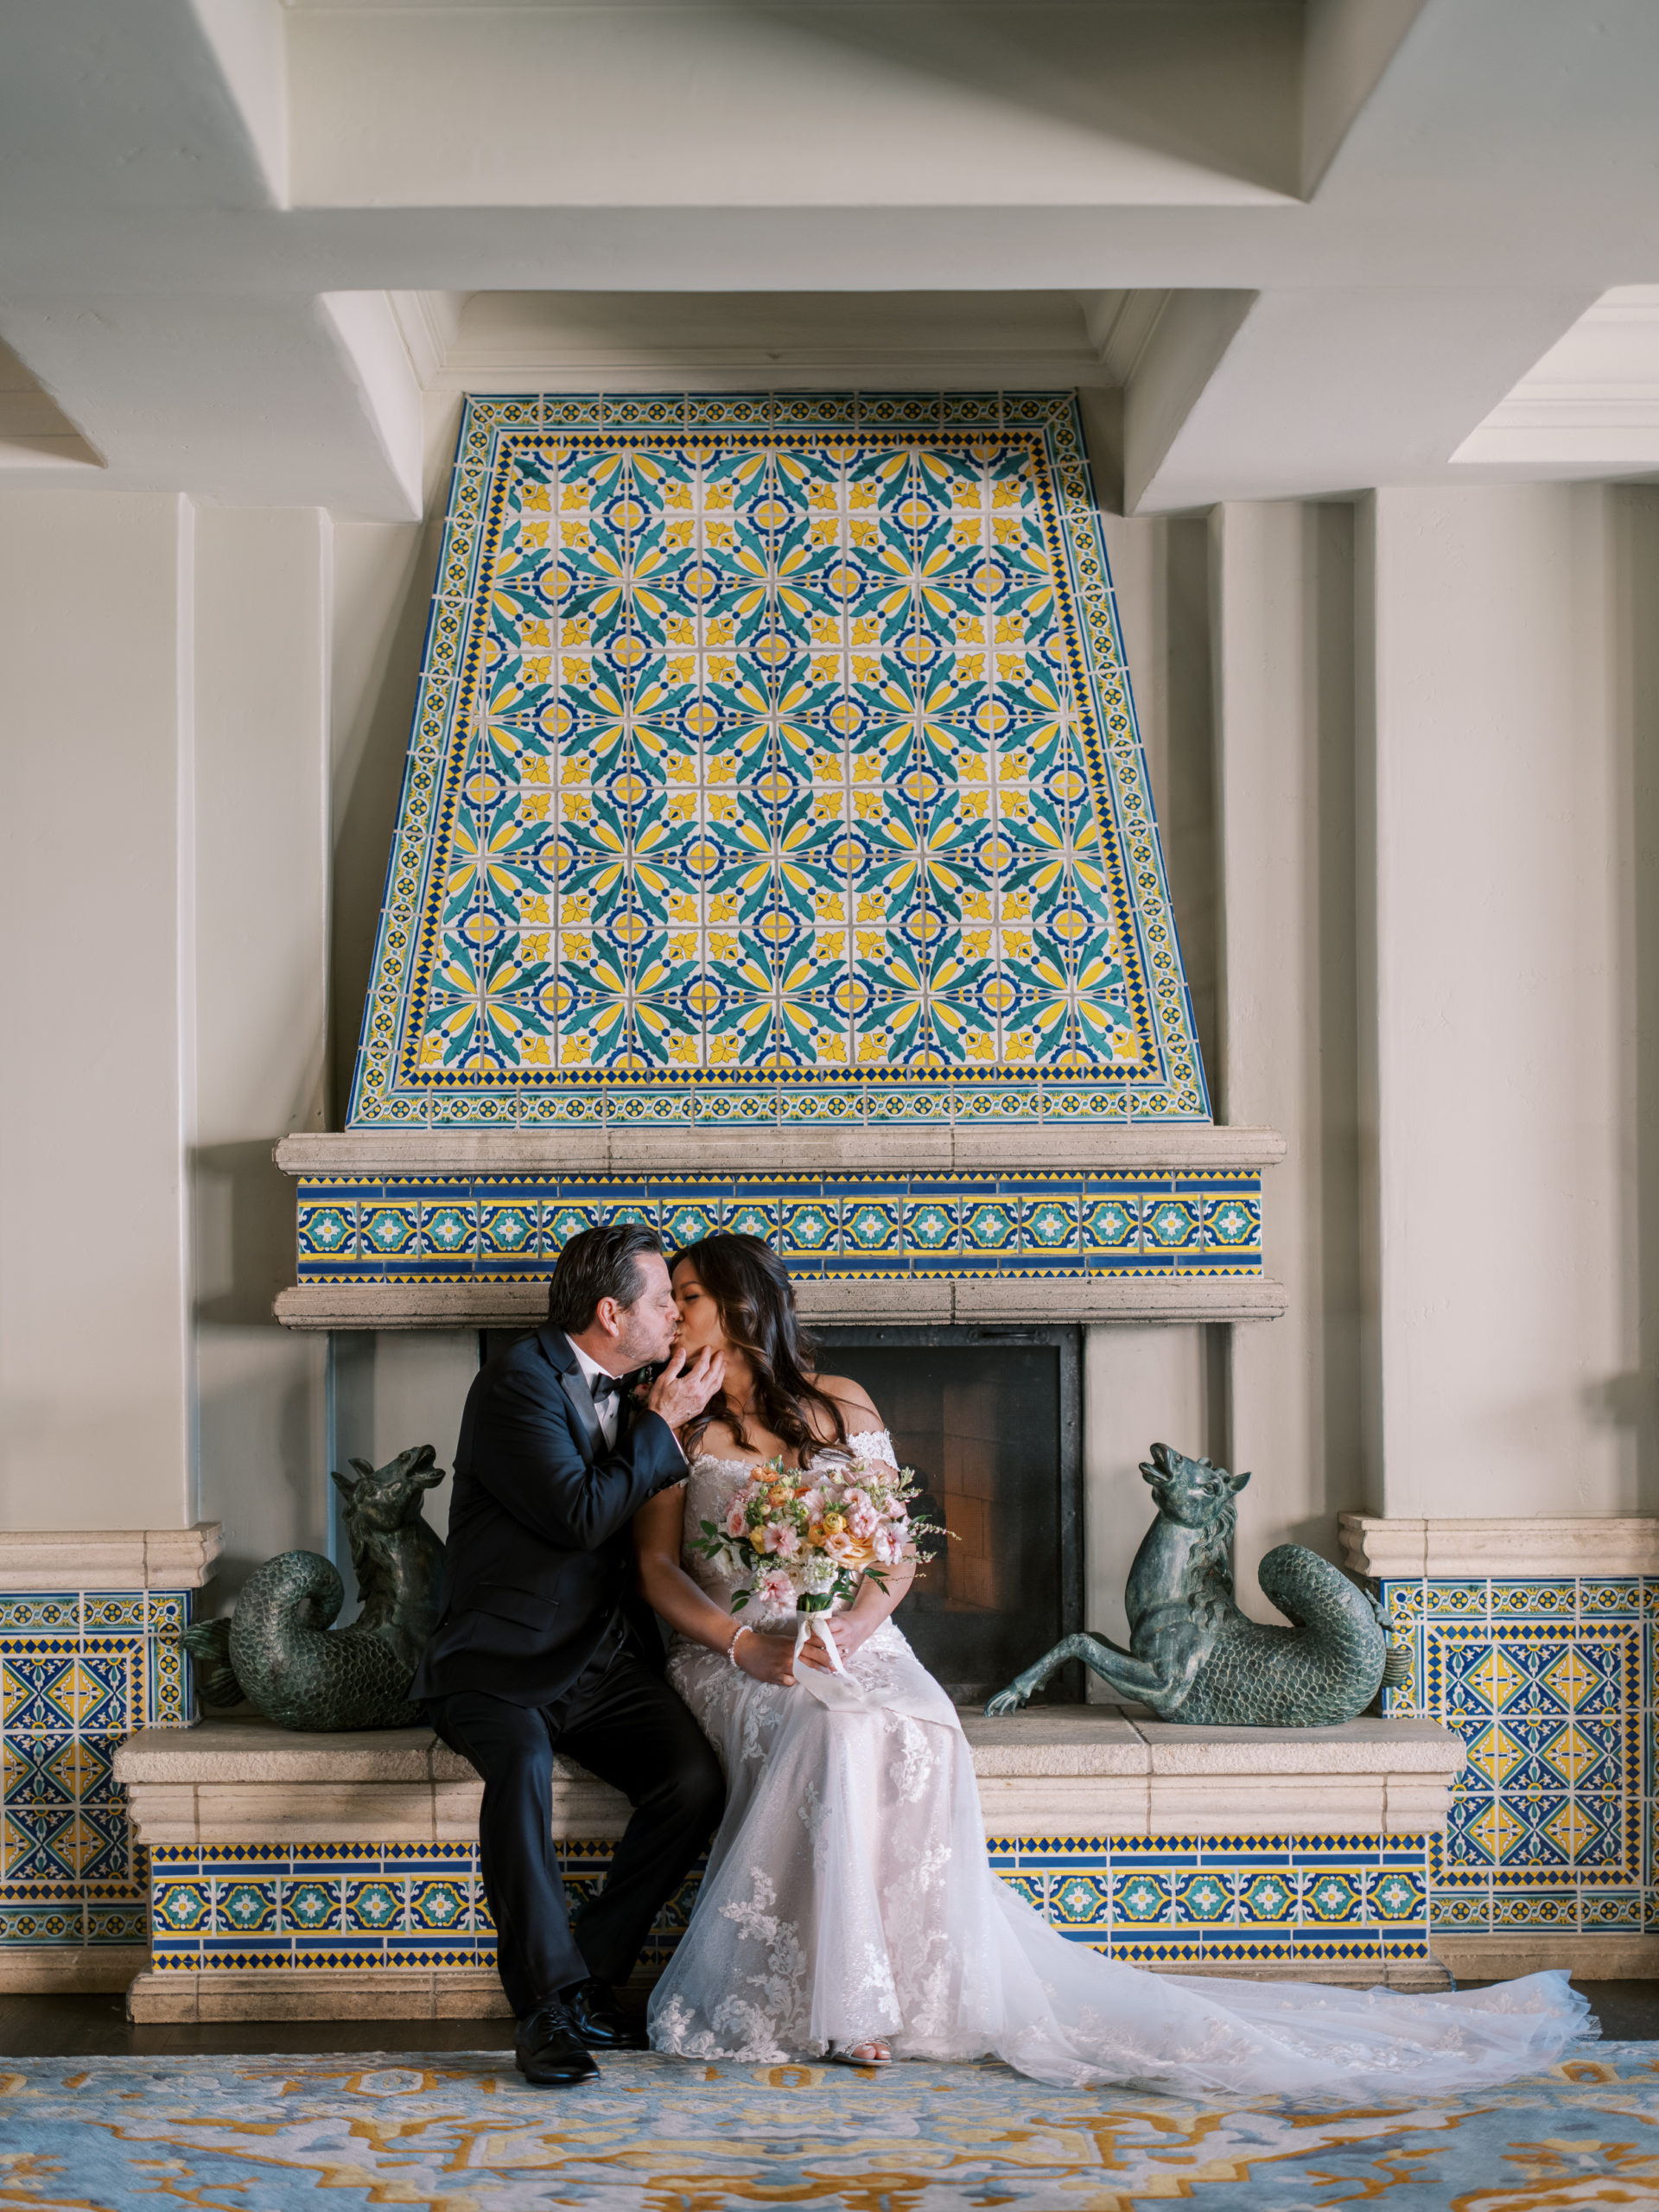 Bride and Groom at La Valencia Hotel restaurant fireplace